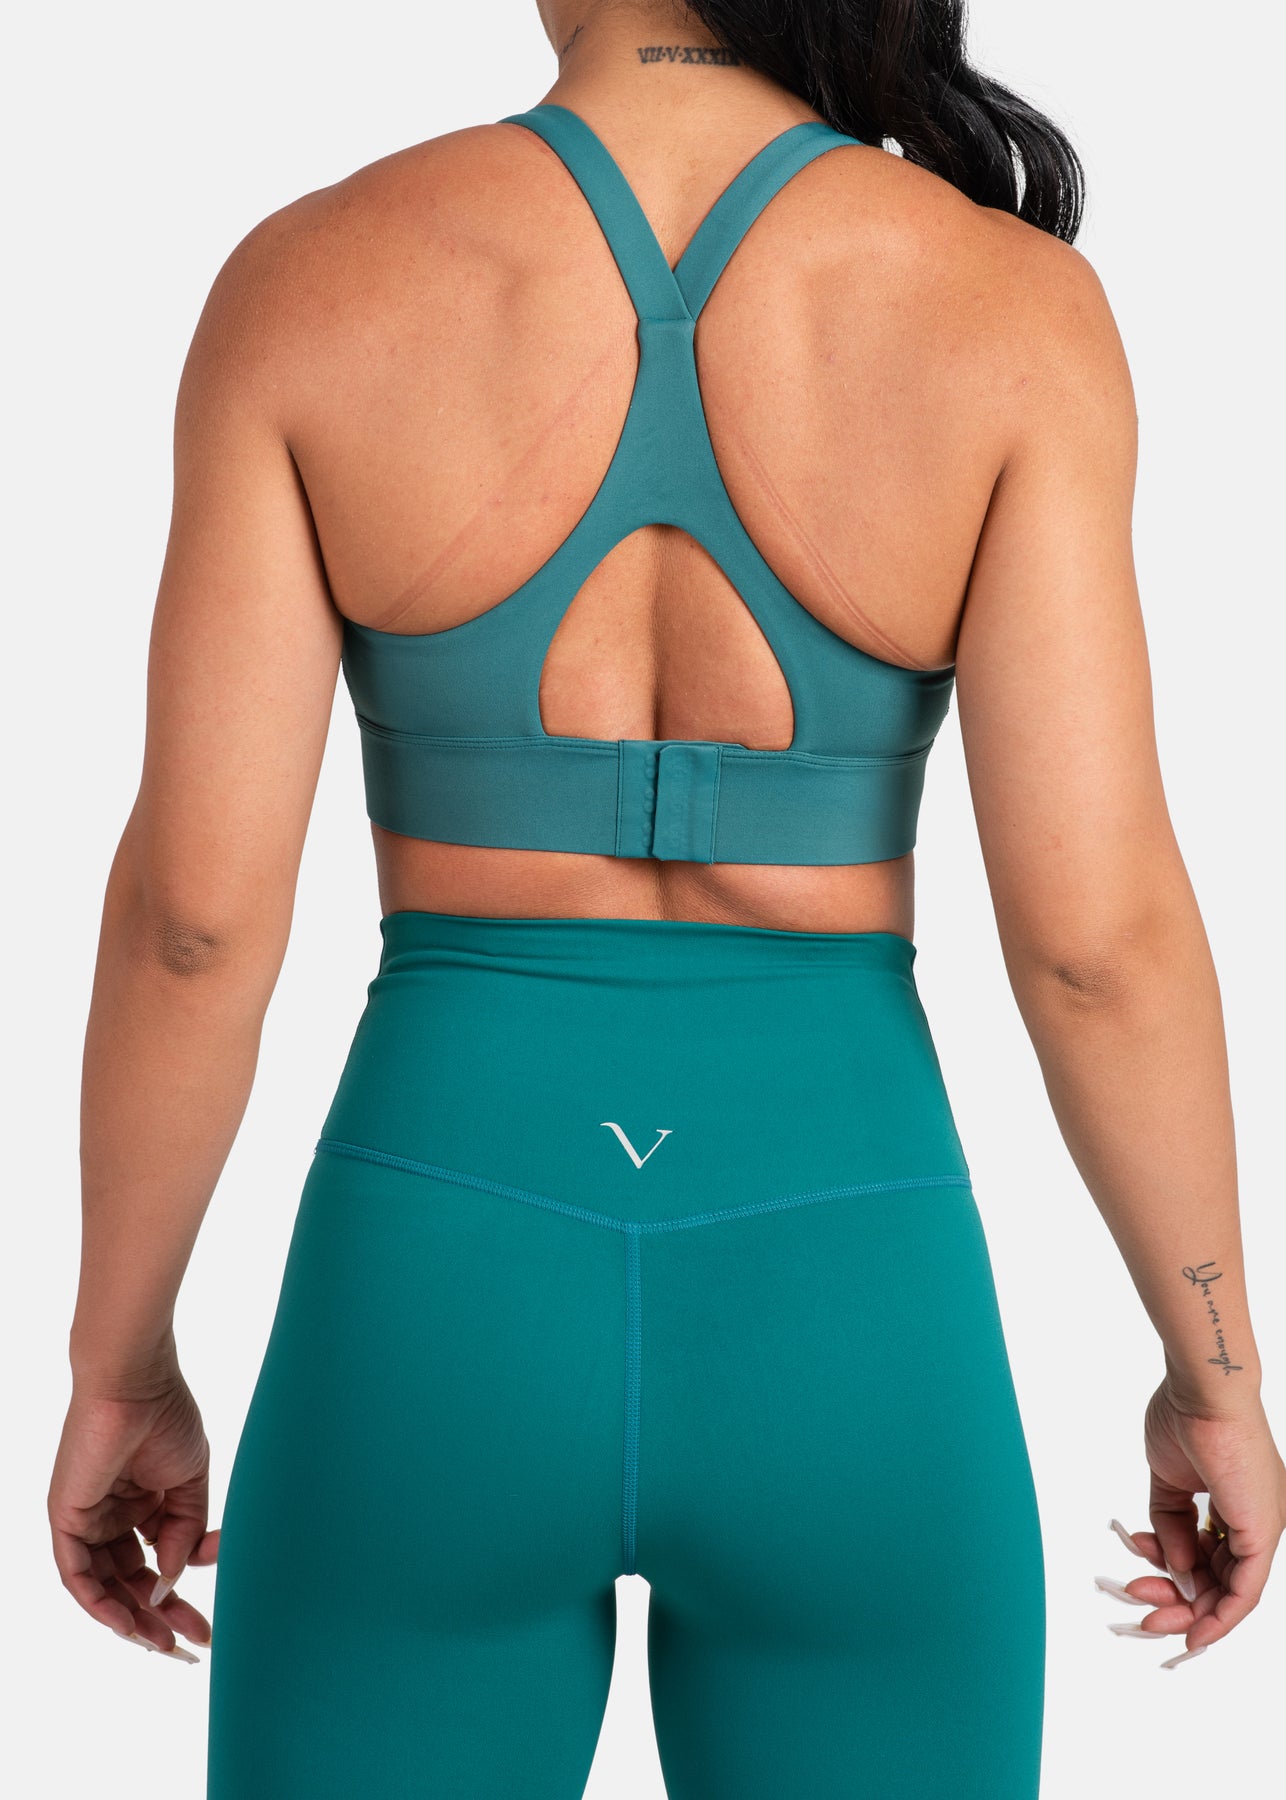 Unlimited Green - Padded Sports Bra – THESPIAN HEART CLOTHING